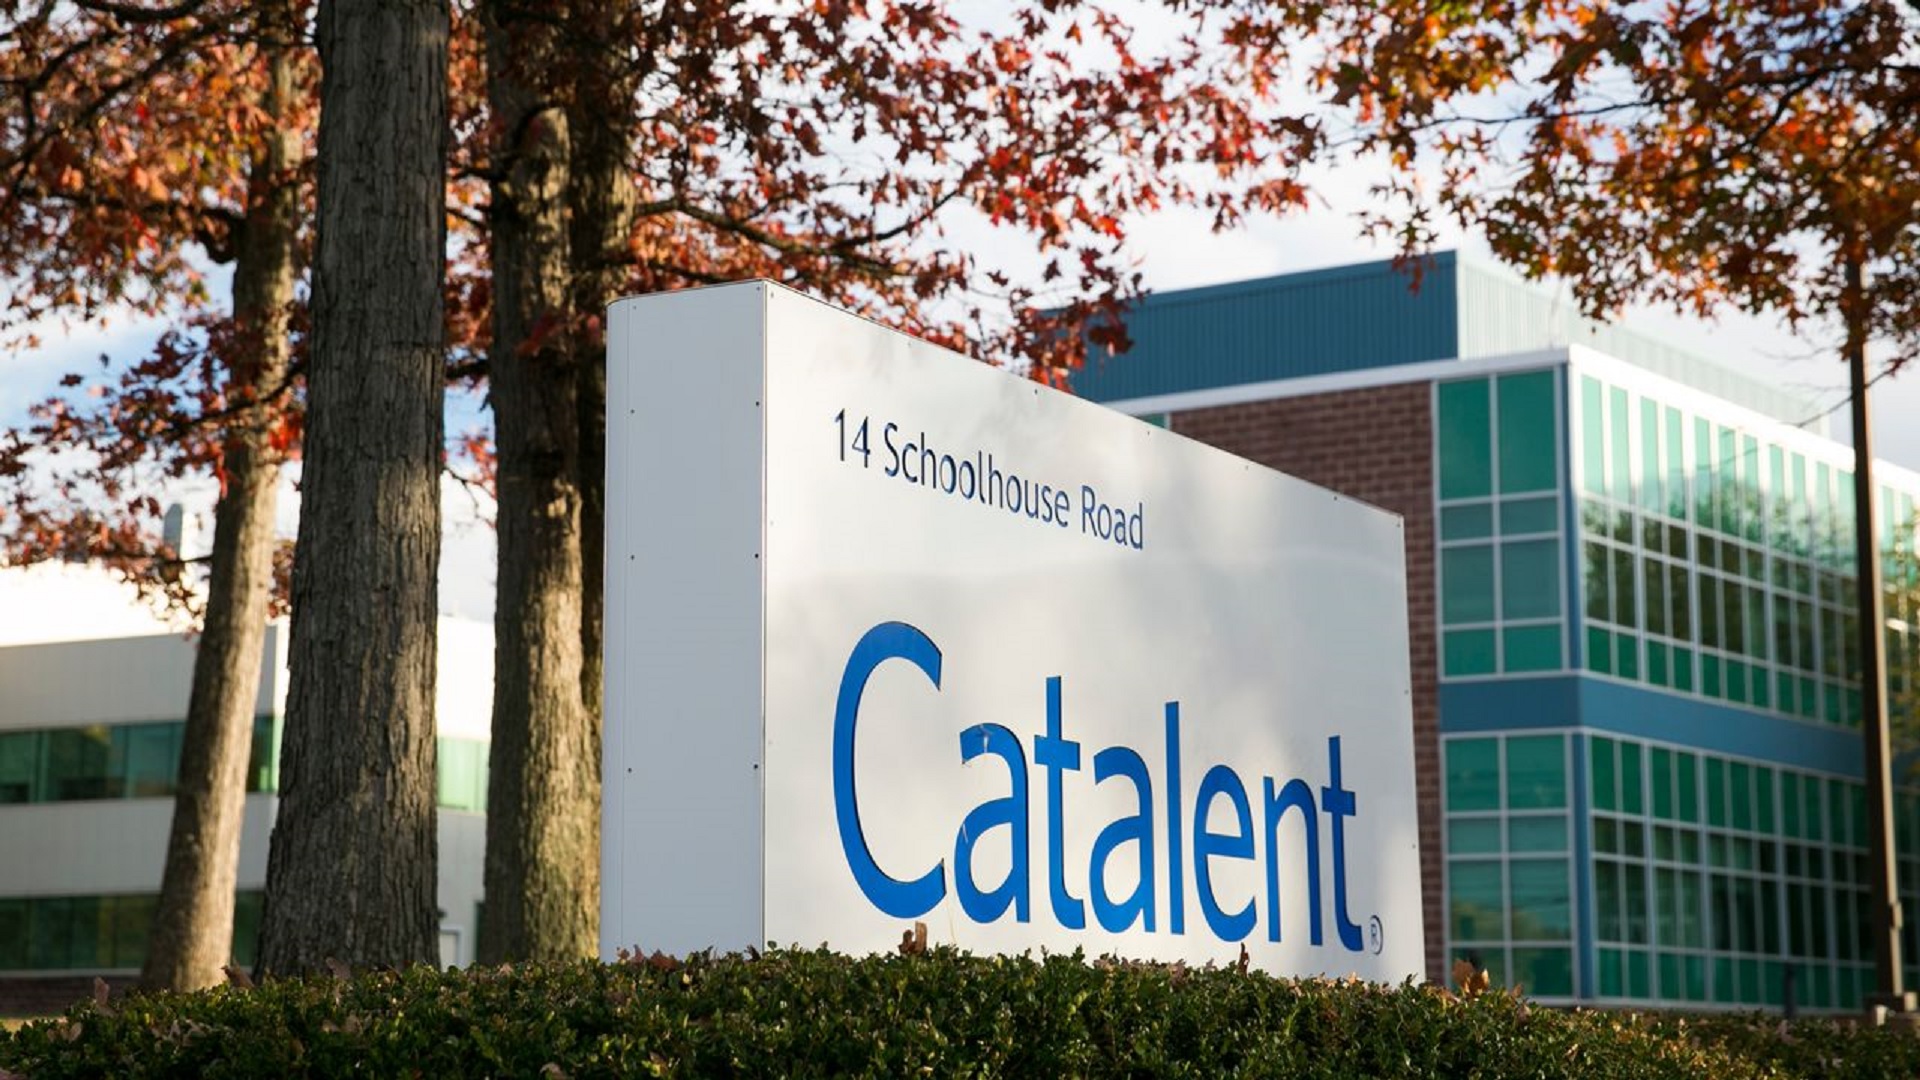 Catalent Stevanato κορωνοϊός: Συνεργασία κατά του covid-19